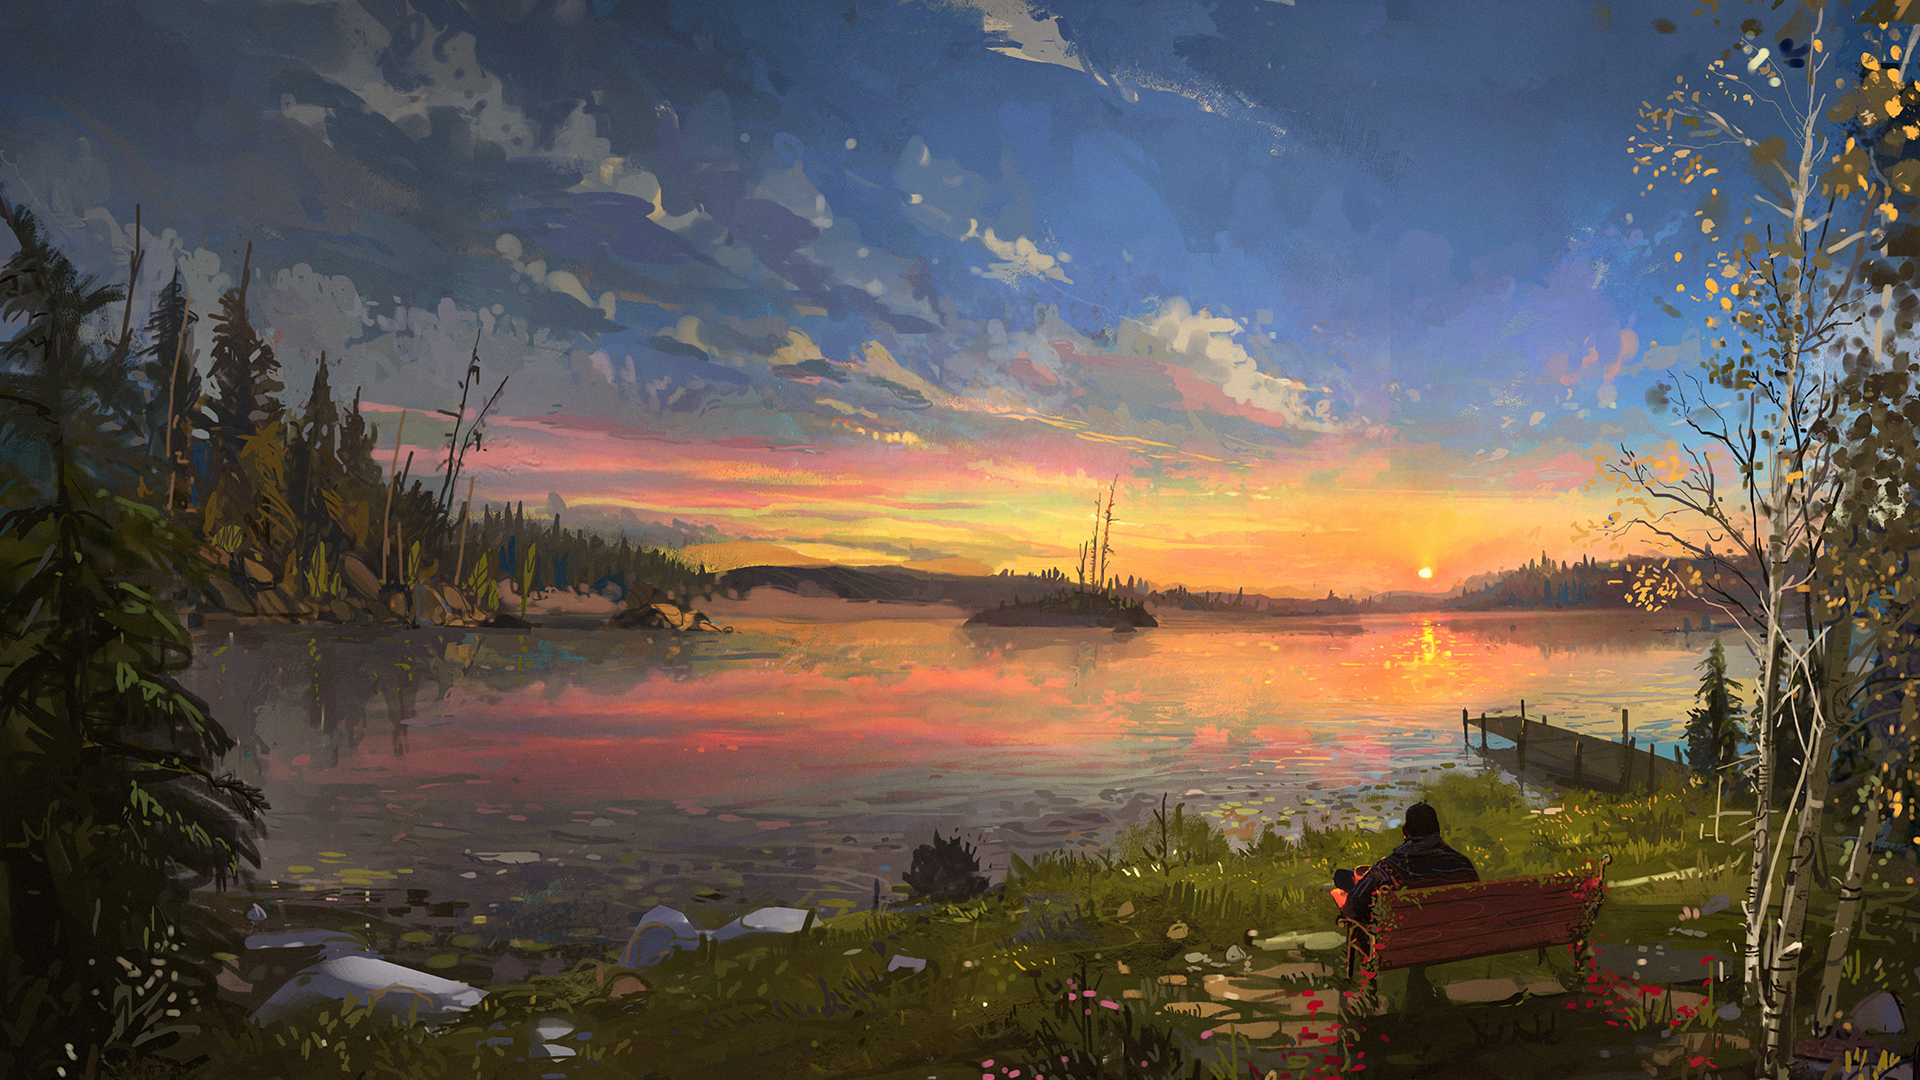 General 1920x1080 Ismail Inceoglu landscape sunset nature bench water clouds sky